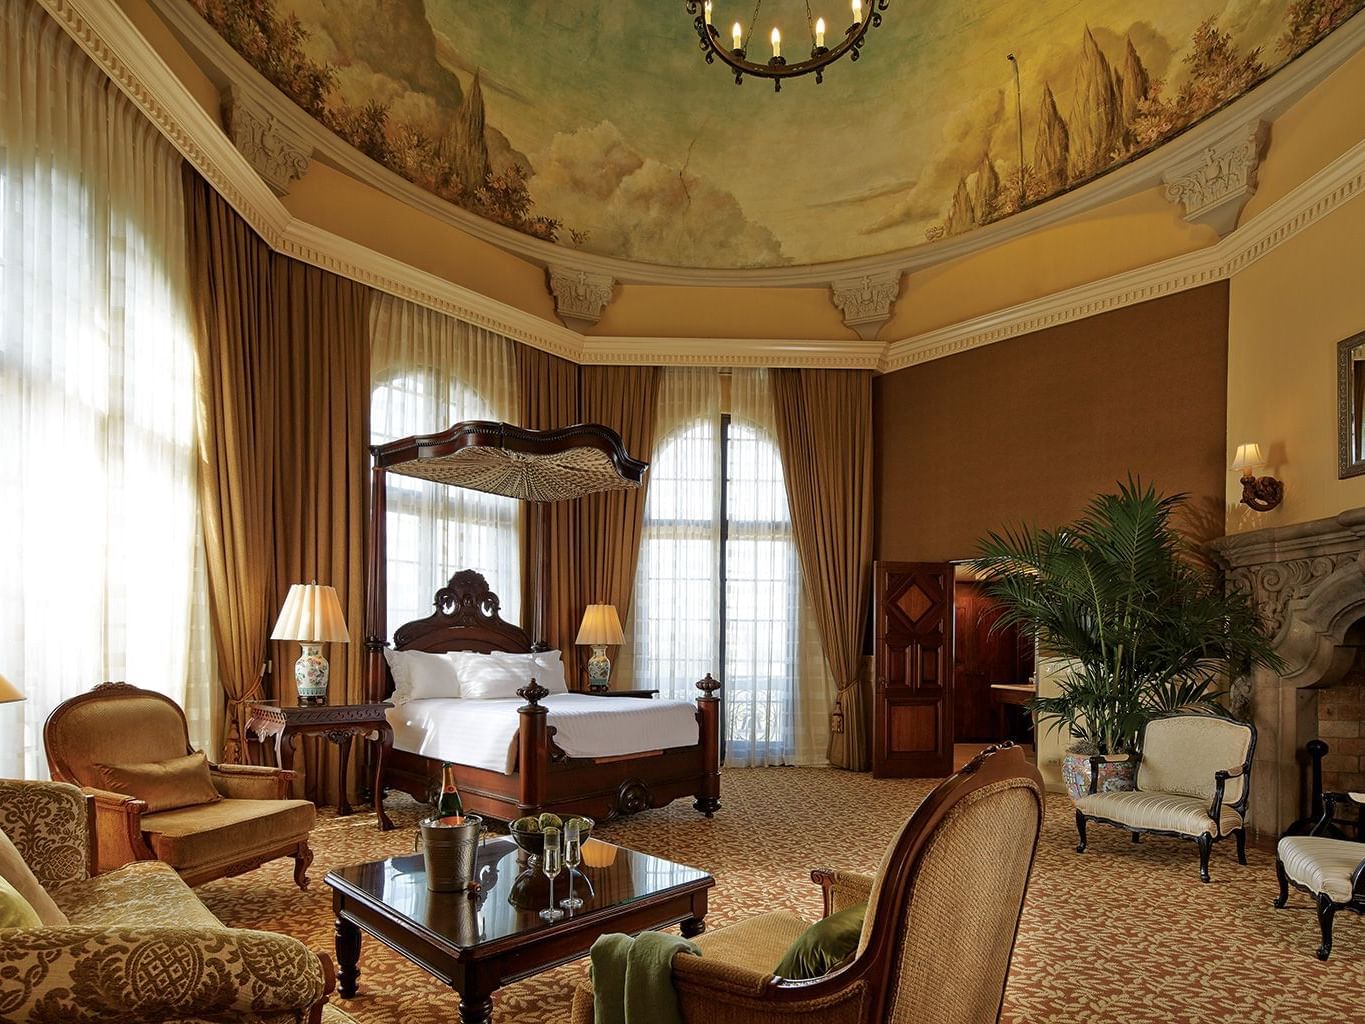 large circular room with canopy bed, seating area and fireplace